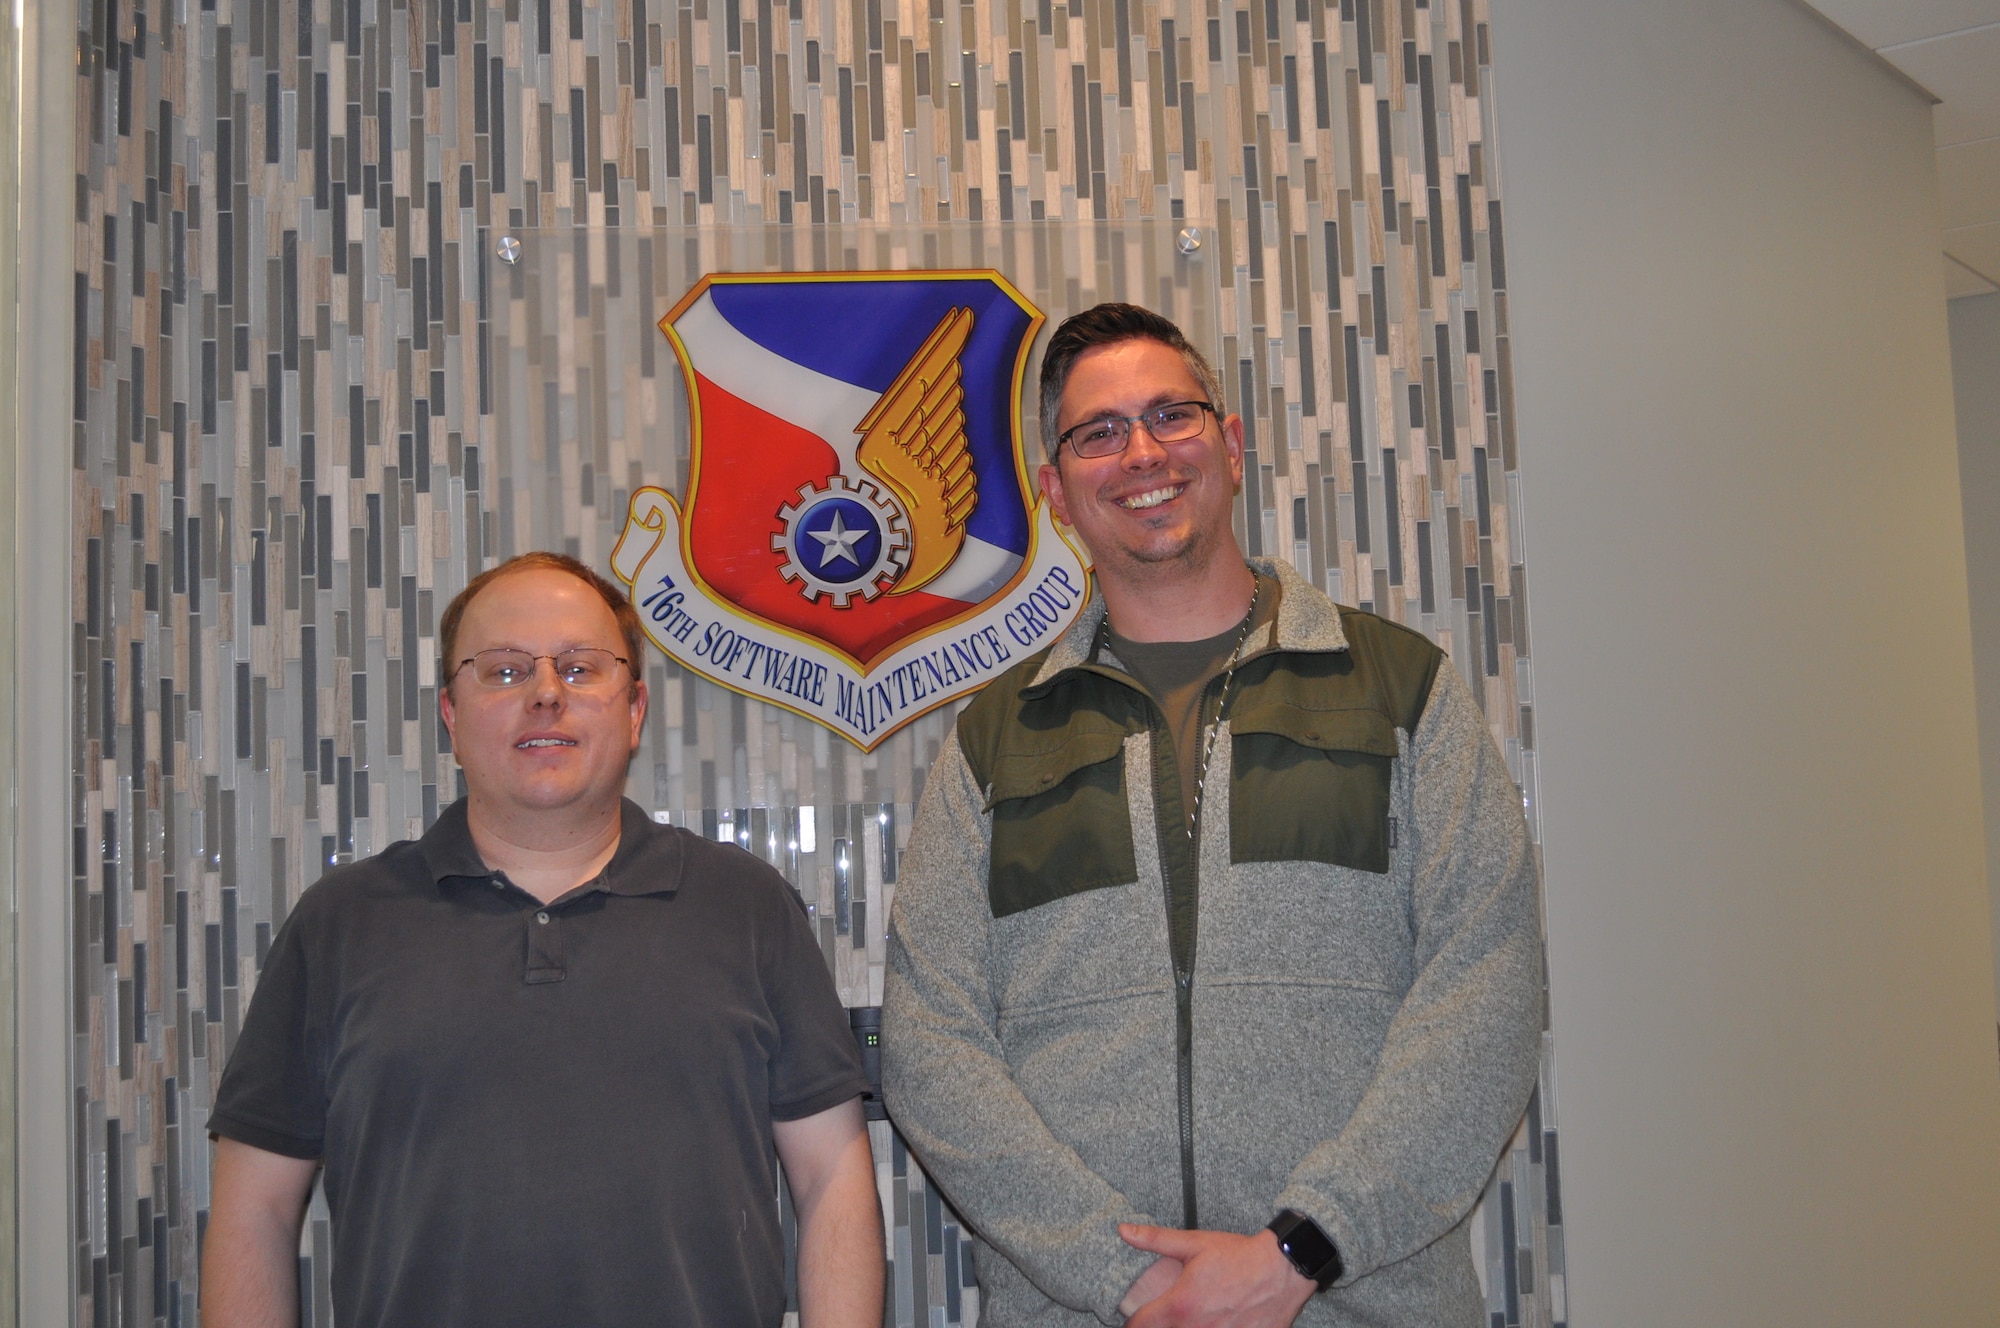 555th Software Maintenance Squadron Flight Chief Curtis Haley and 555th SMXS Electrical Engineer and Team Lead Rex Mason worked together to help the 555th SMXS’s SPEHS Test Team gain recognition as an Air Force Sustainment Center nominee for the “2018 General Larry O. Spencer Innovation Team Award.”